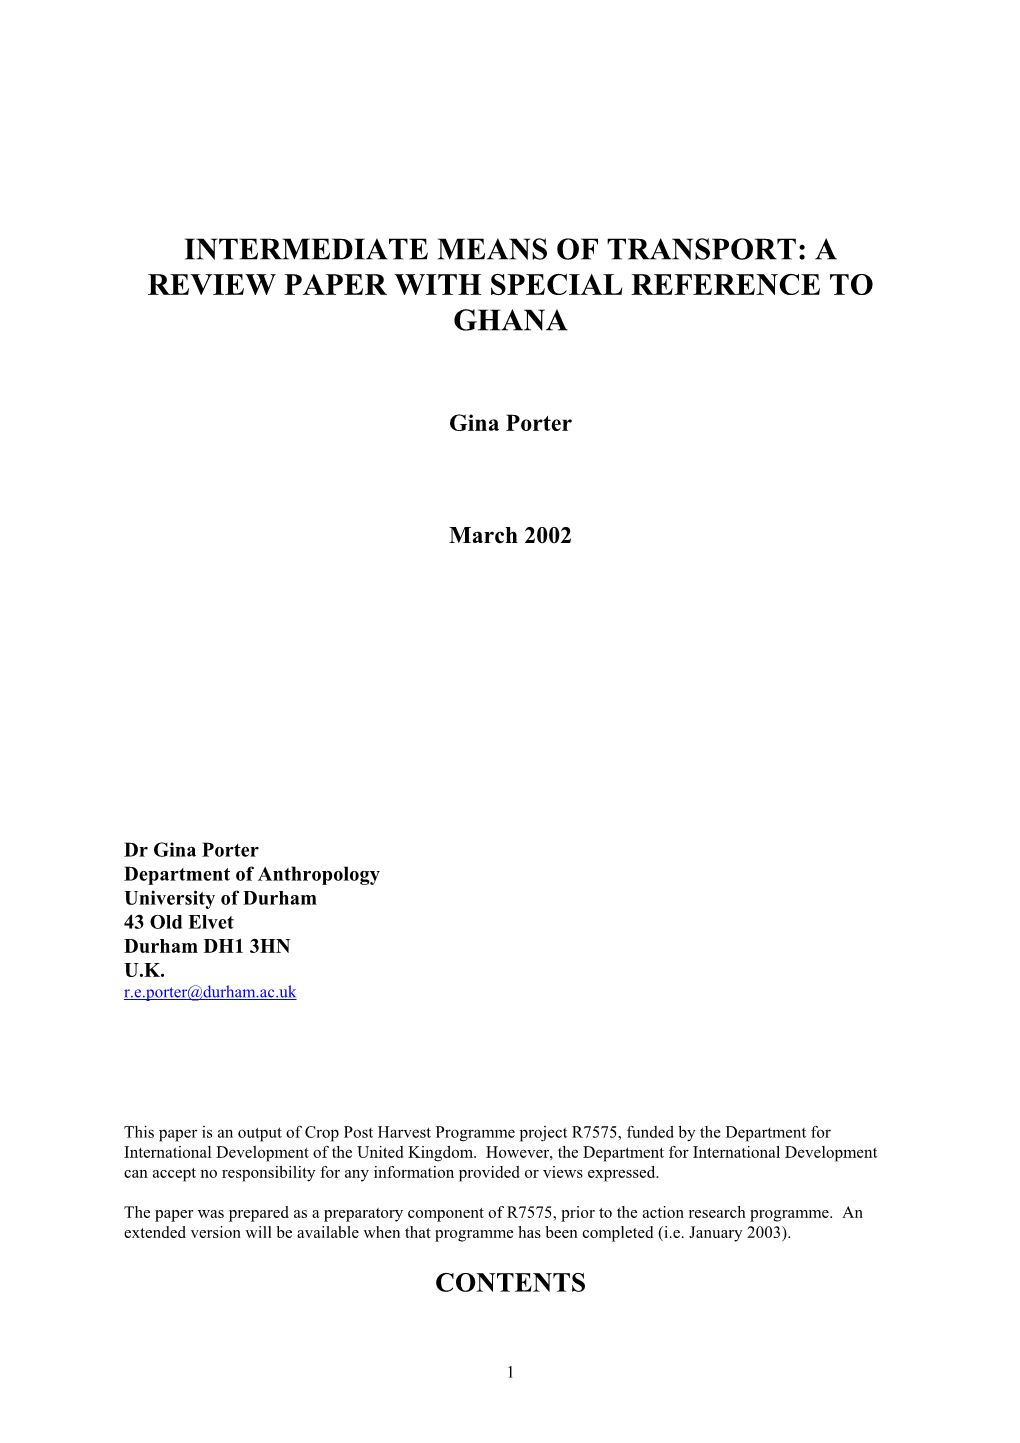 Intermediate Means of Transport. a Review Paper with Special Reference